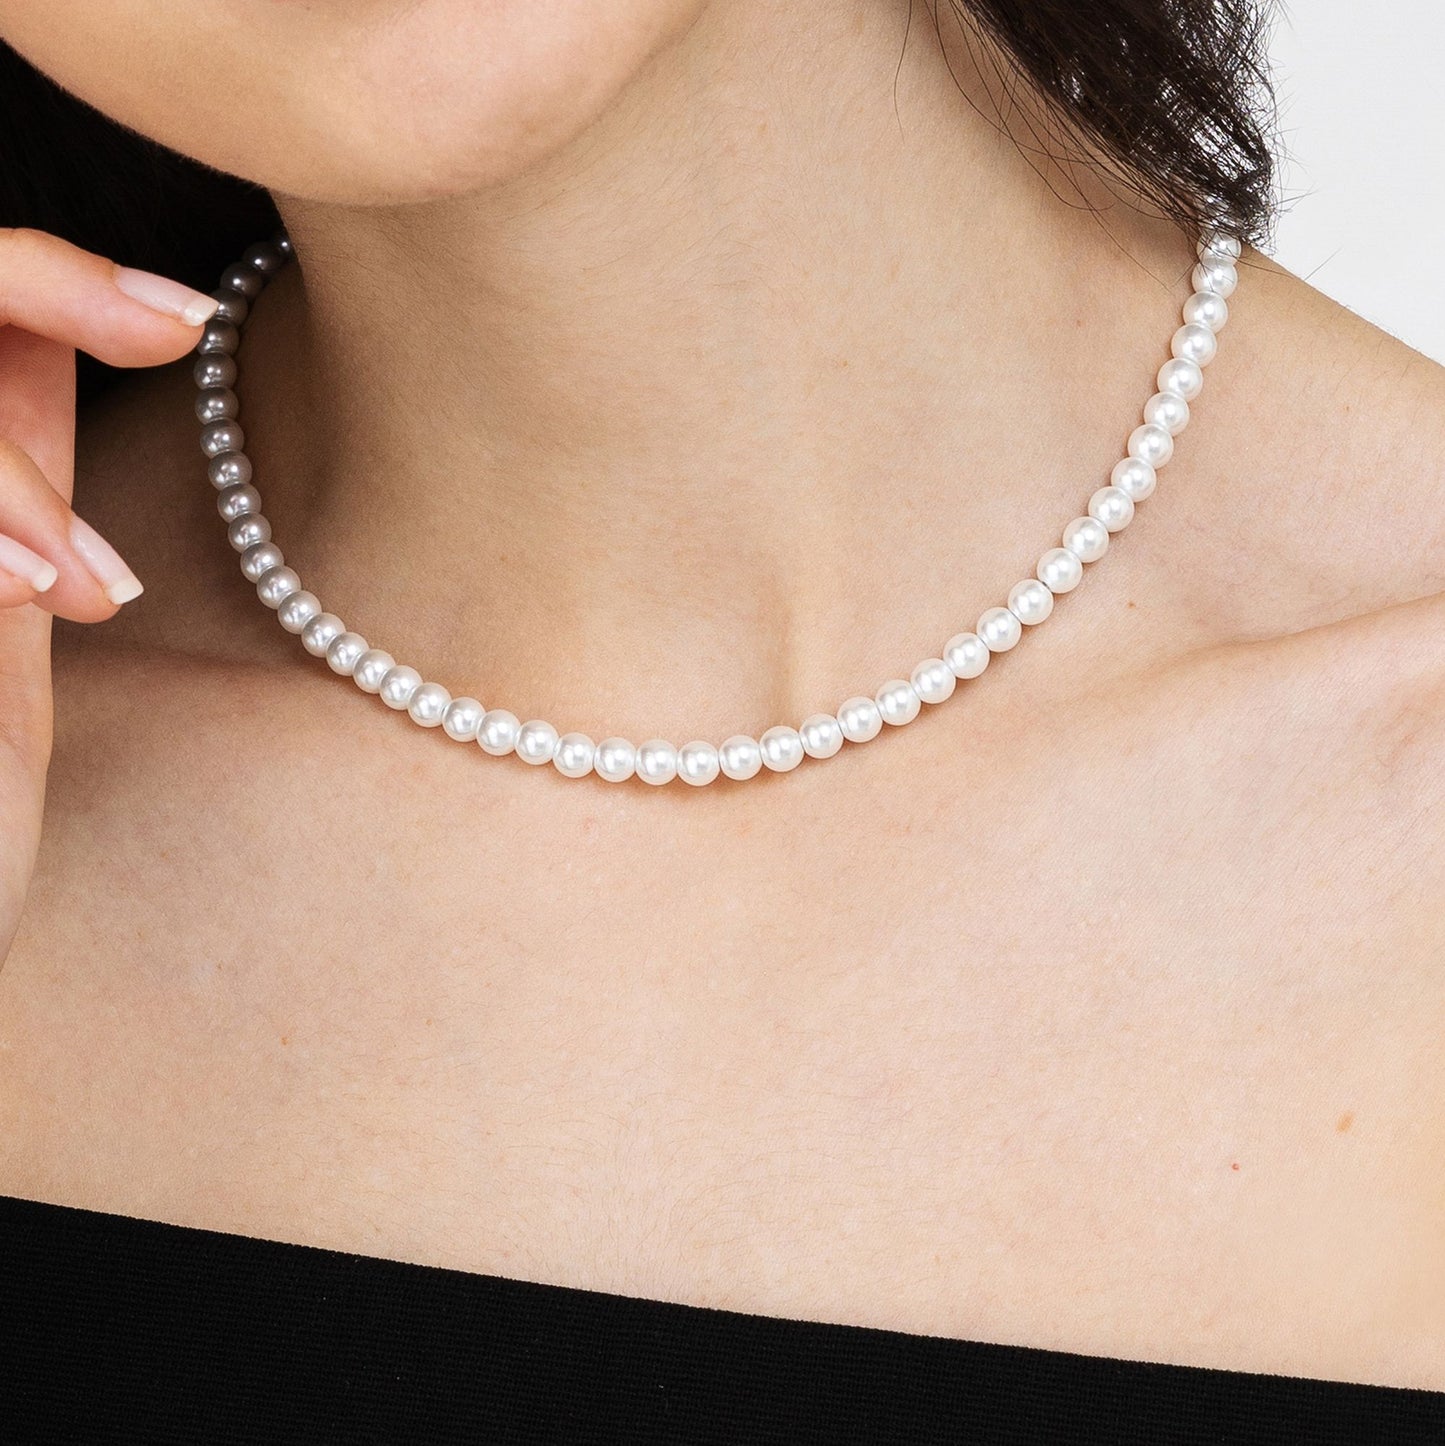 WOMAN'S NECKLACE OF WHITE PEARLS Luca Barra